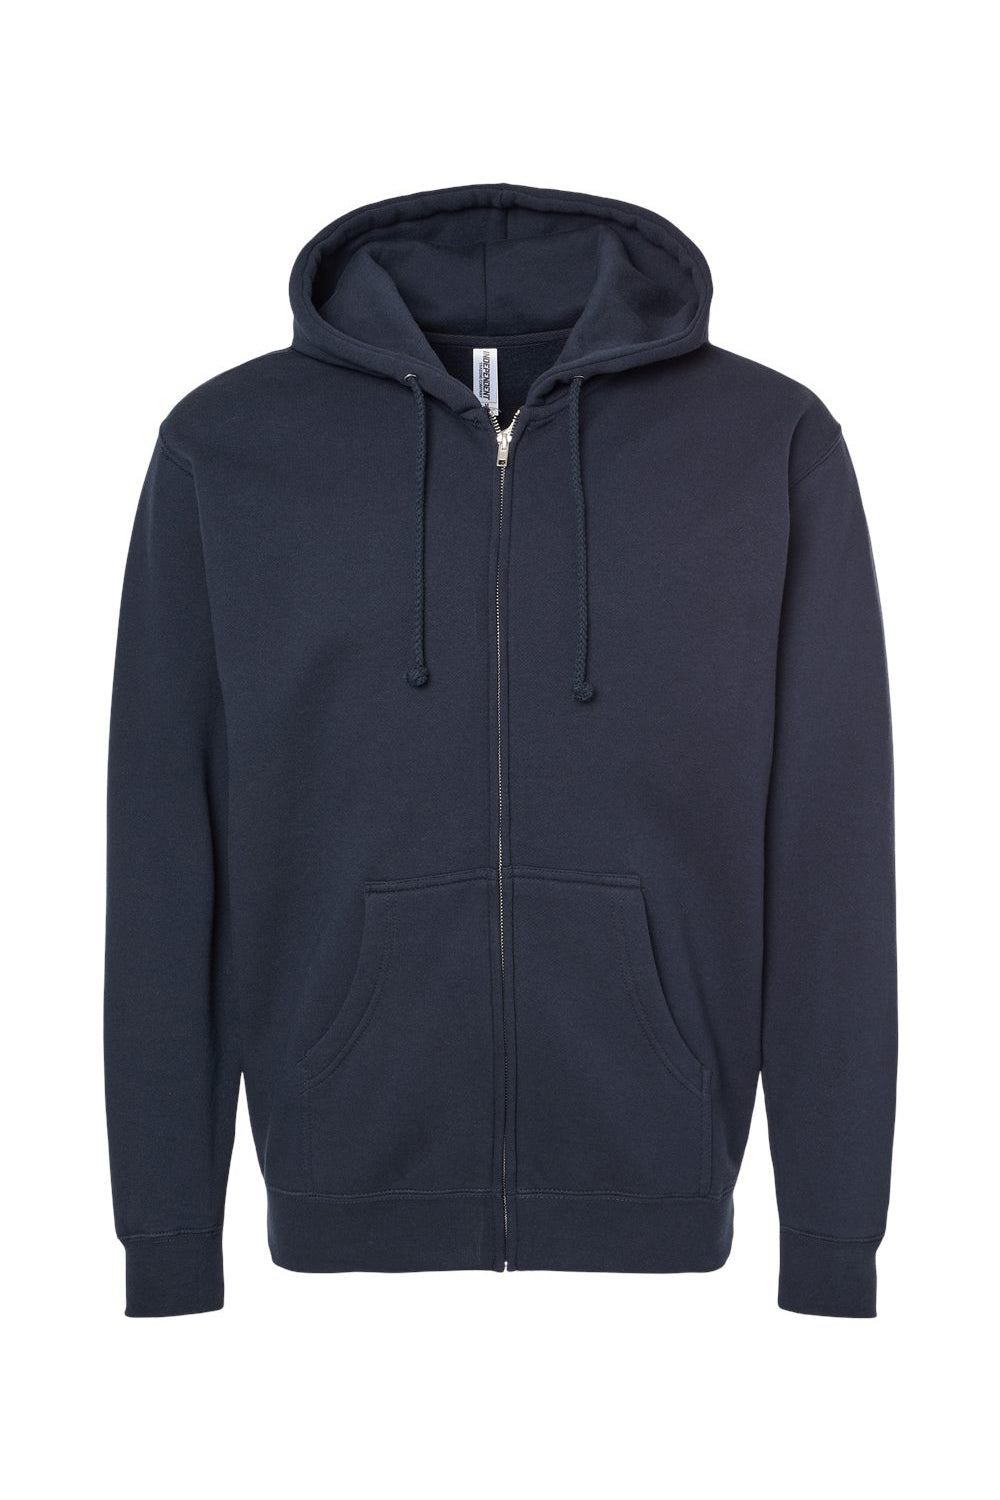 Independent Trading Co. IND4000Z Mens Full Zip Hooded Sweatshirt Hoodie Navy Blue Flat Front